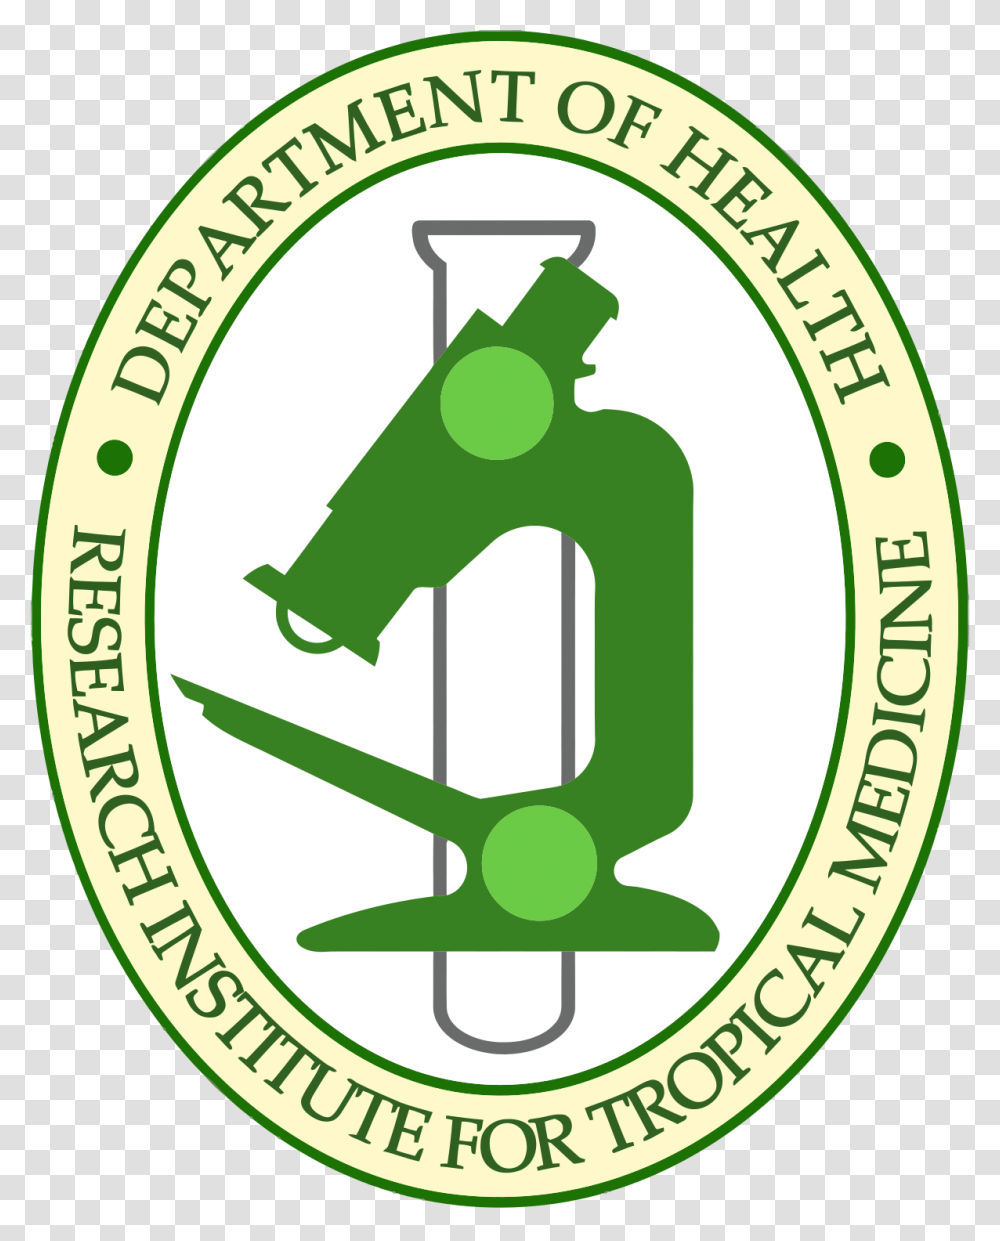 Research Institute For Tropical Medicine, Logo, Trademark, Label Transparent Png